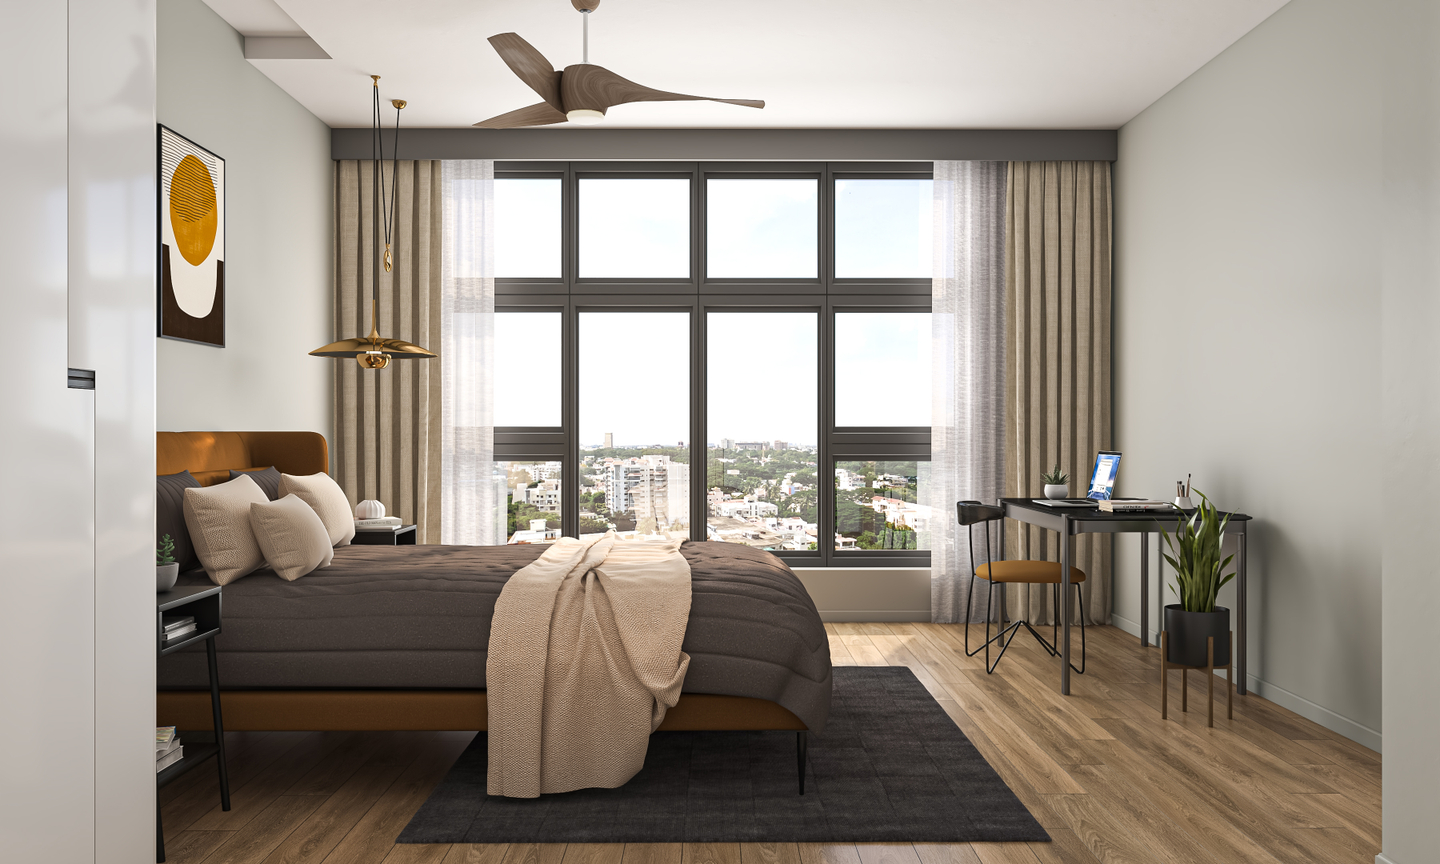 Spacious Master Bedroom With Big Window And Accent Light